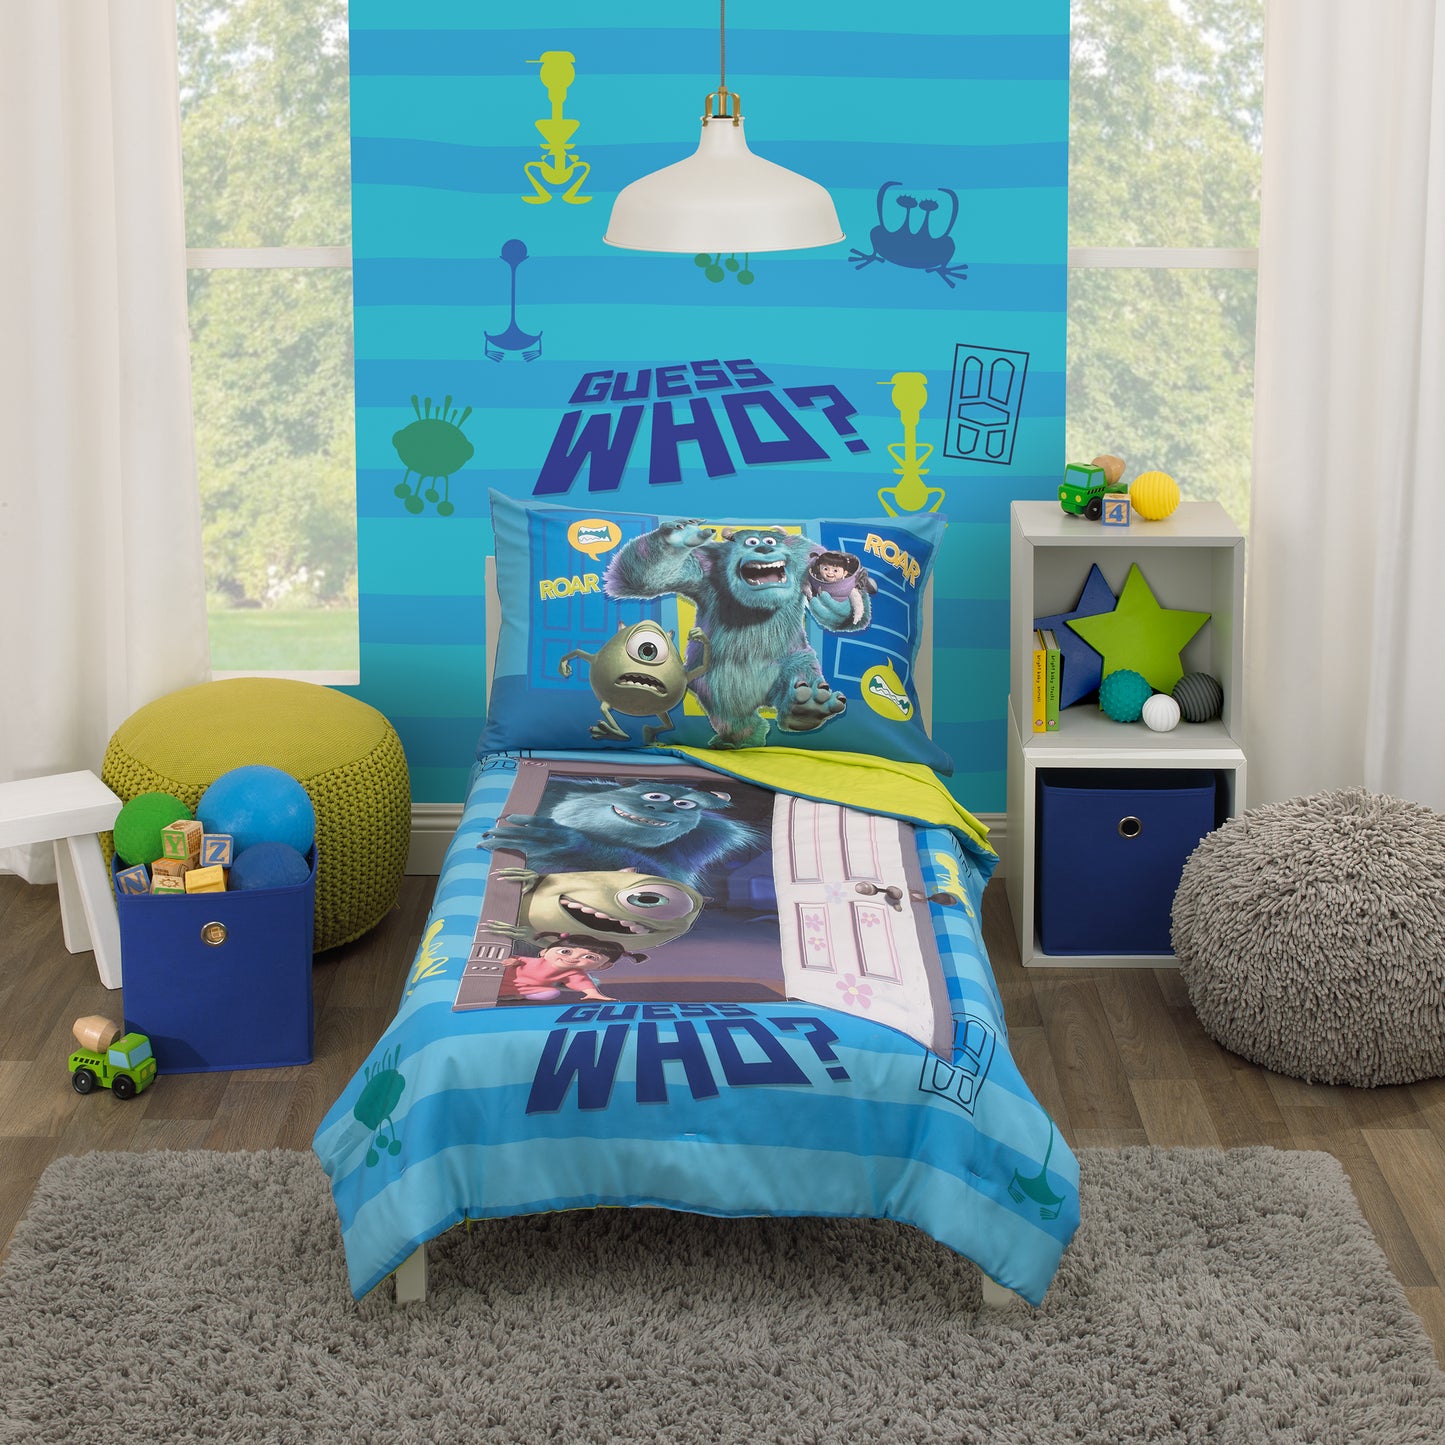 Disney Monsters Inc. Guess Who Blue and Green Sully, Mike, and Boo 4 Piece Toddler Bed Set - Comforter, Fitted Bottom Sheet, Flat Top Sheet, and Reversible Pillowcase